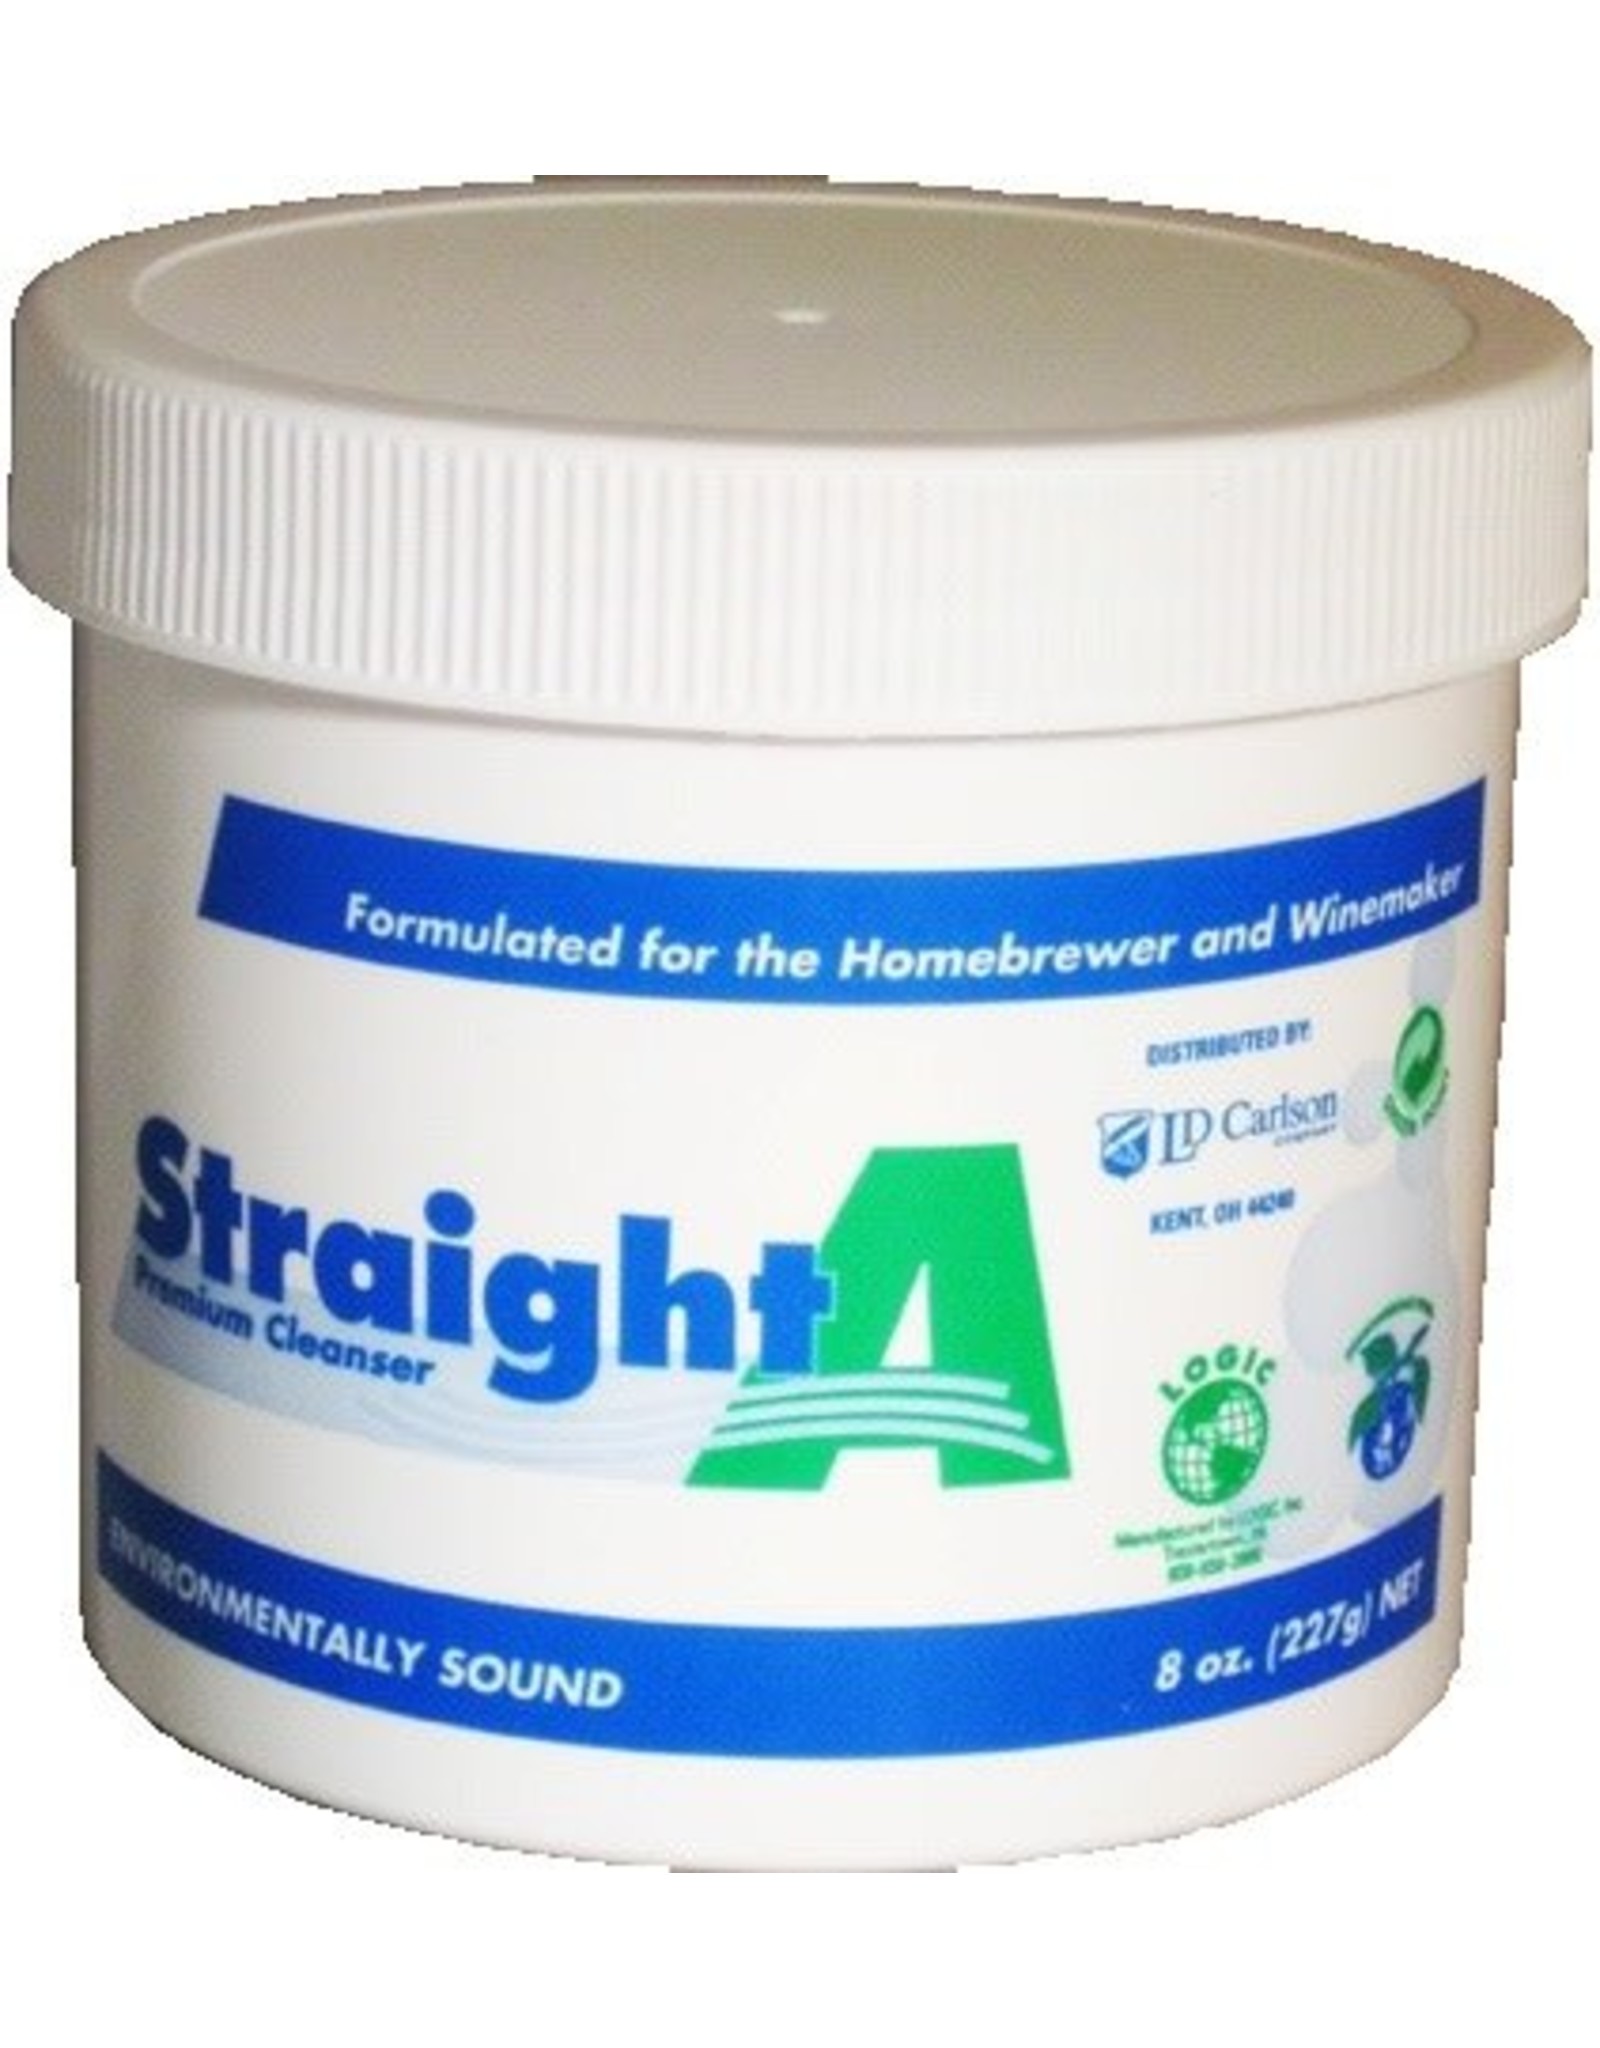 STRAIGHT A CLEANSER 8 OZ